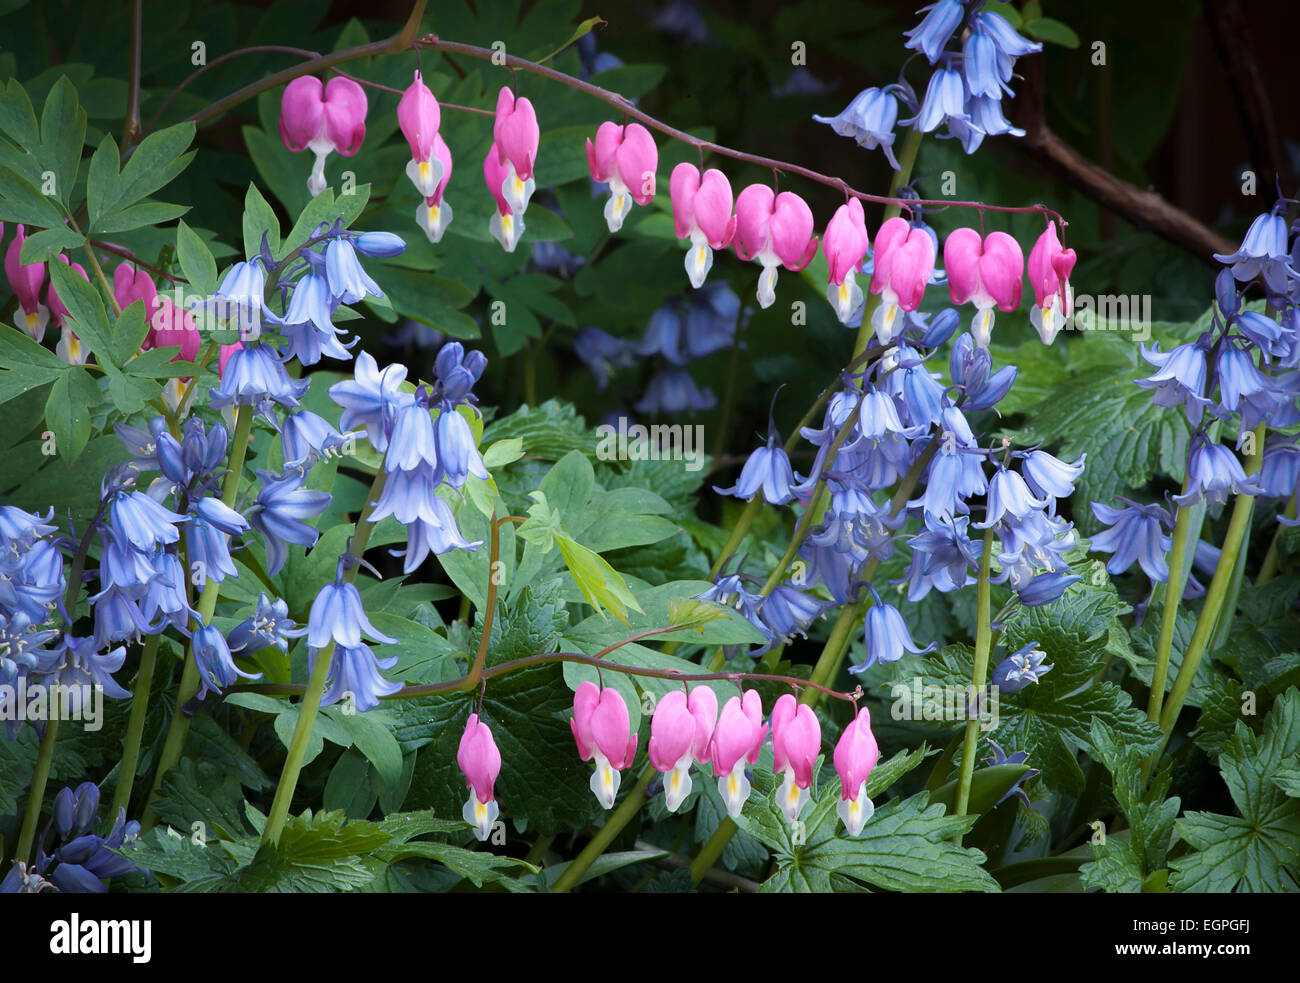 Bleeding heart, Lamprocapnos spectabilis, Two stems of heart shaped flowers hanging gracefully above several stems of Spanish bluebell flowers, Hyacinthoides hispanica, Both are shade tolerant plants. Stock Photo